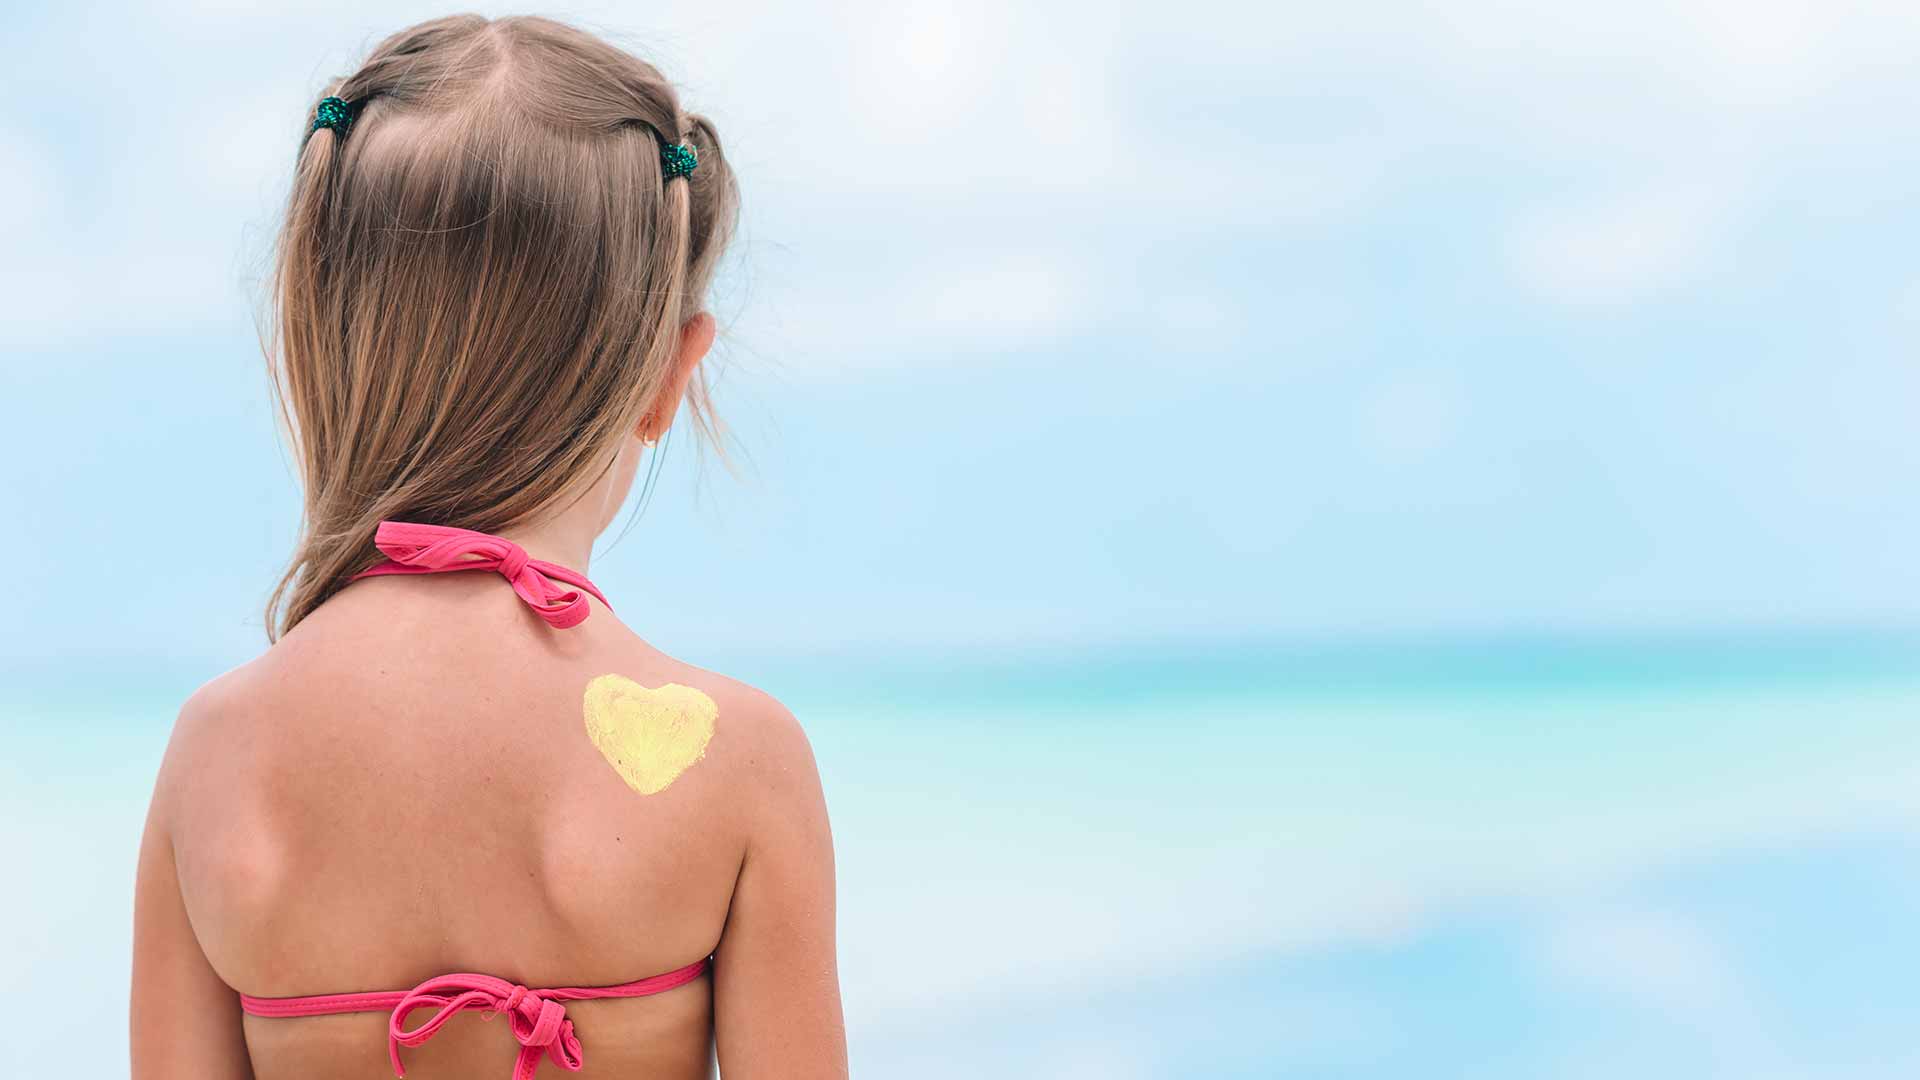 Summer Safety Tips to Keep Kids Safe In The Sun